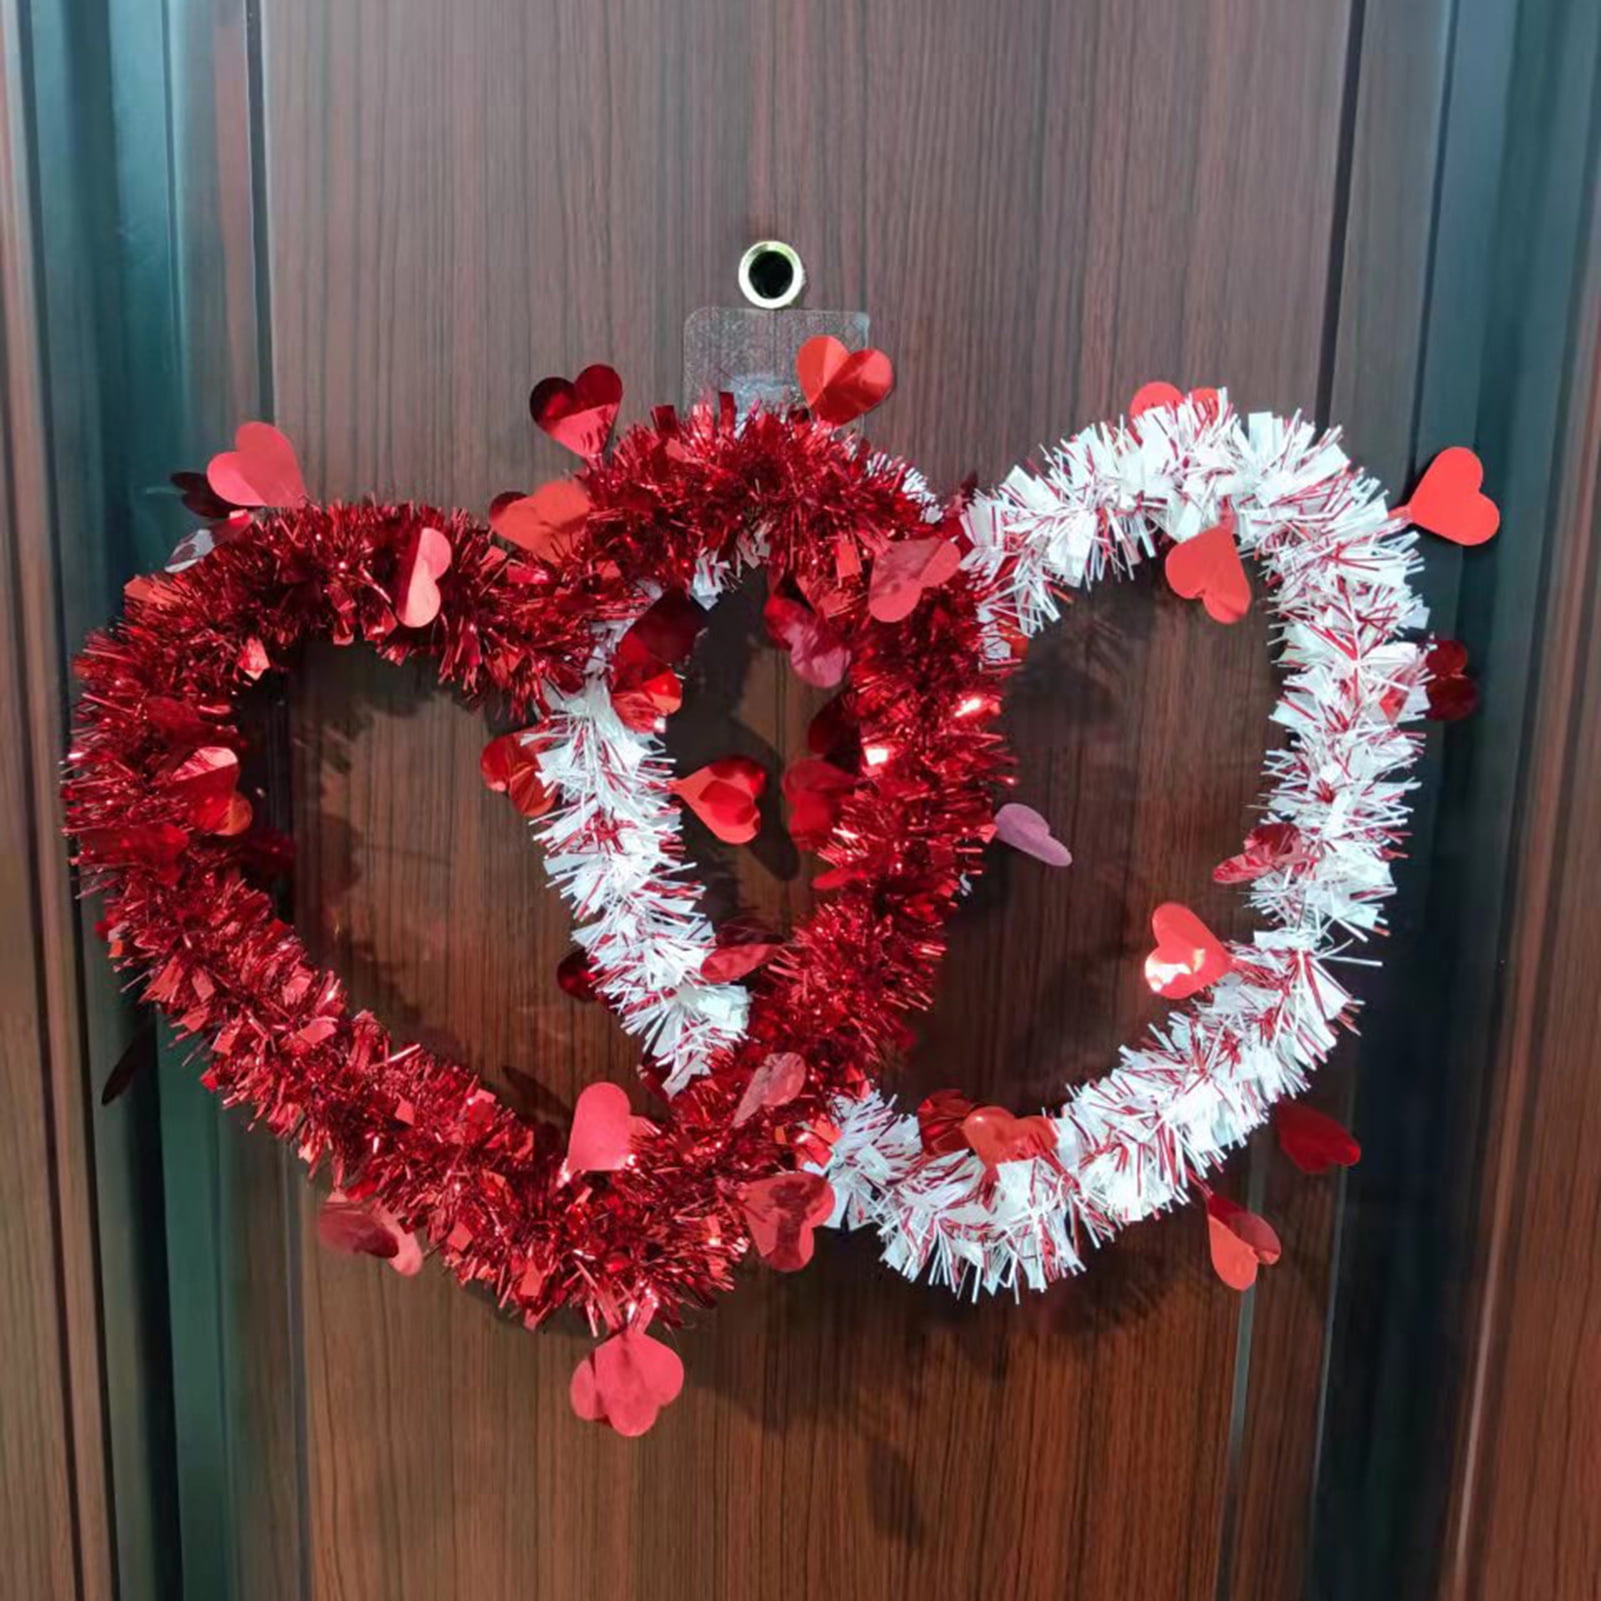 New Wall Hanging Decor Swag red Heart Door Wreath valentine's day Love gift 